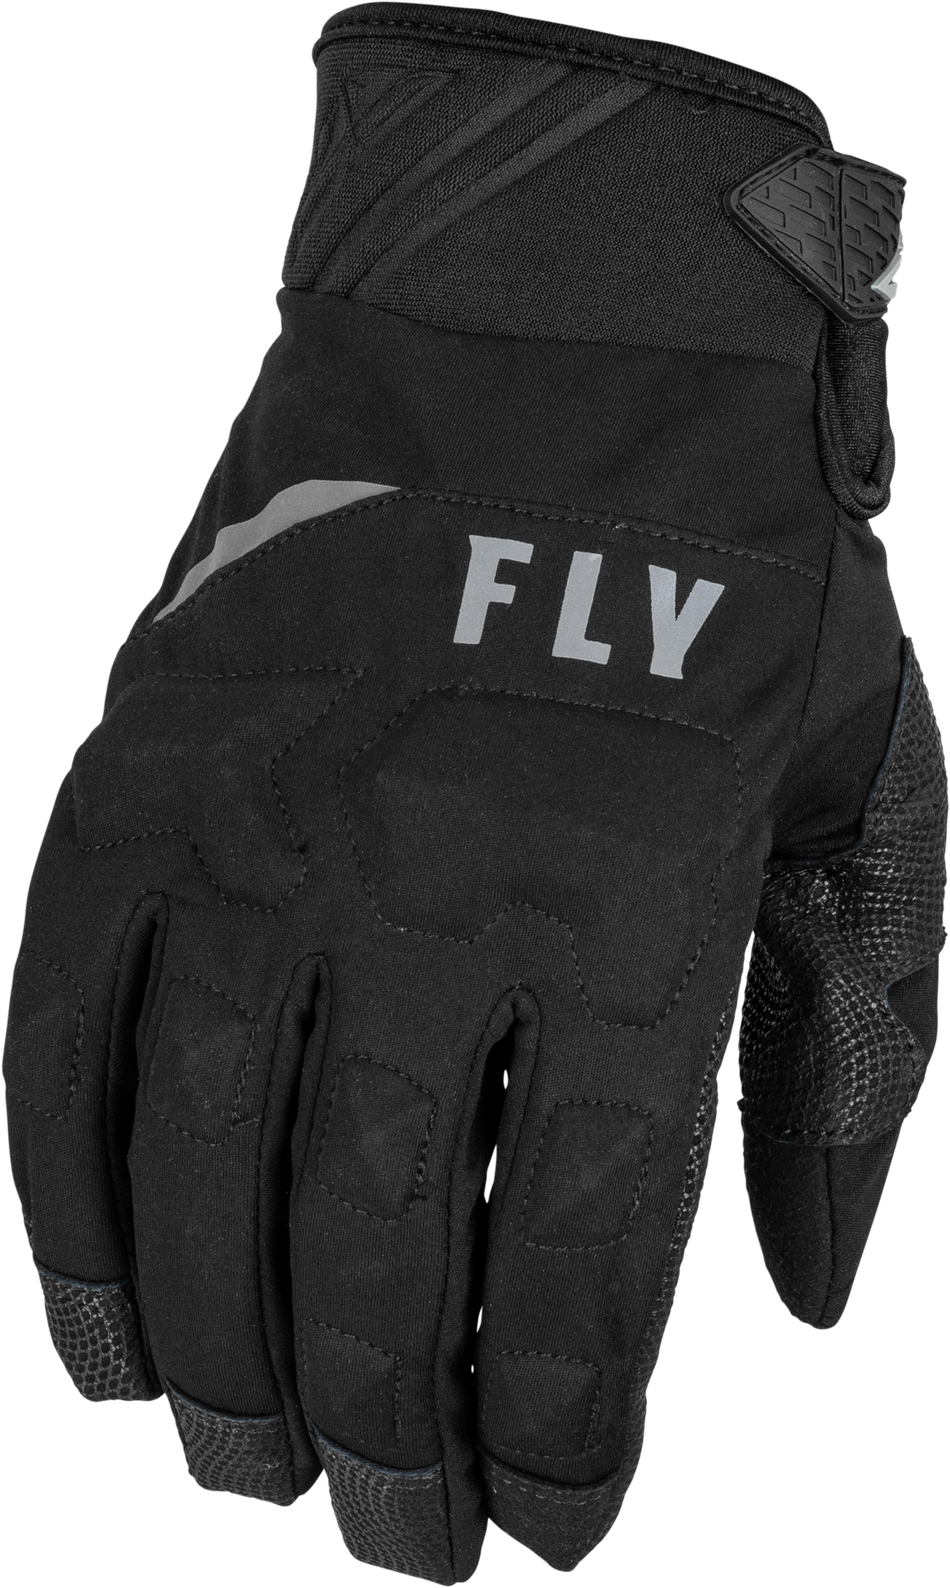 FLY RACING Youth Boundary Gloves Black Yl 371-0700YL